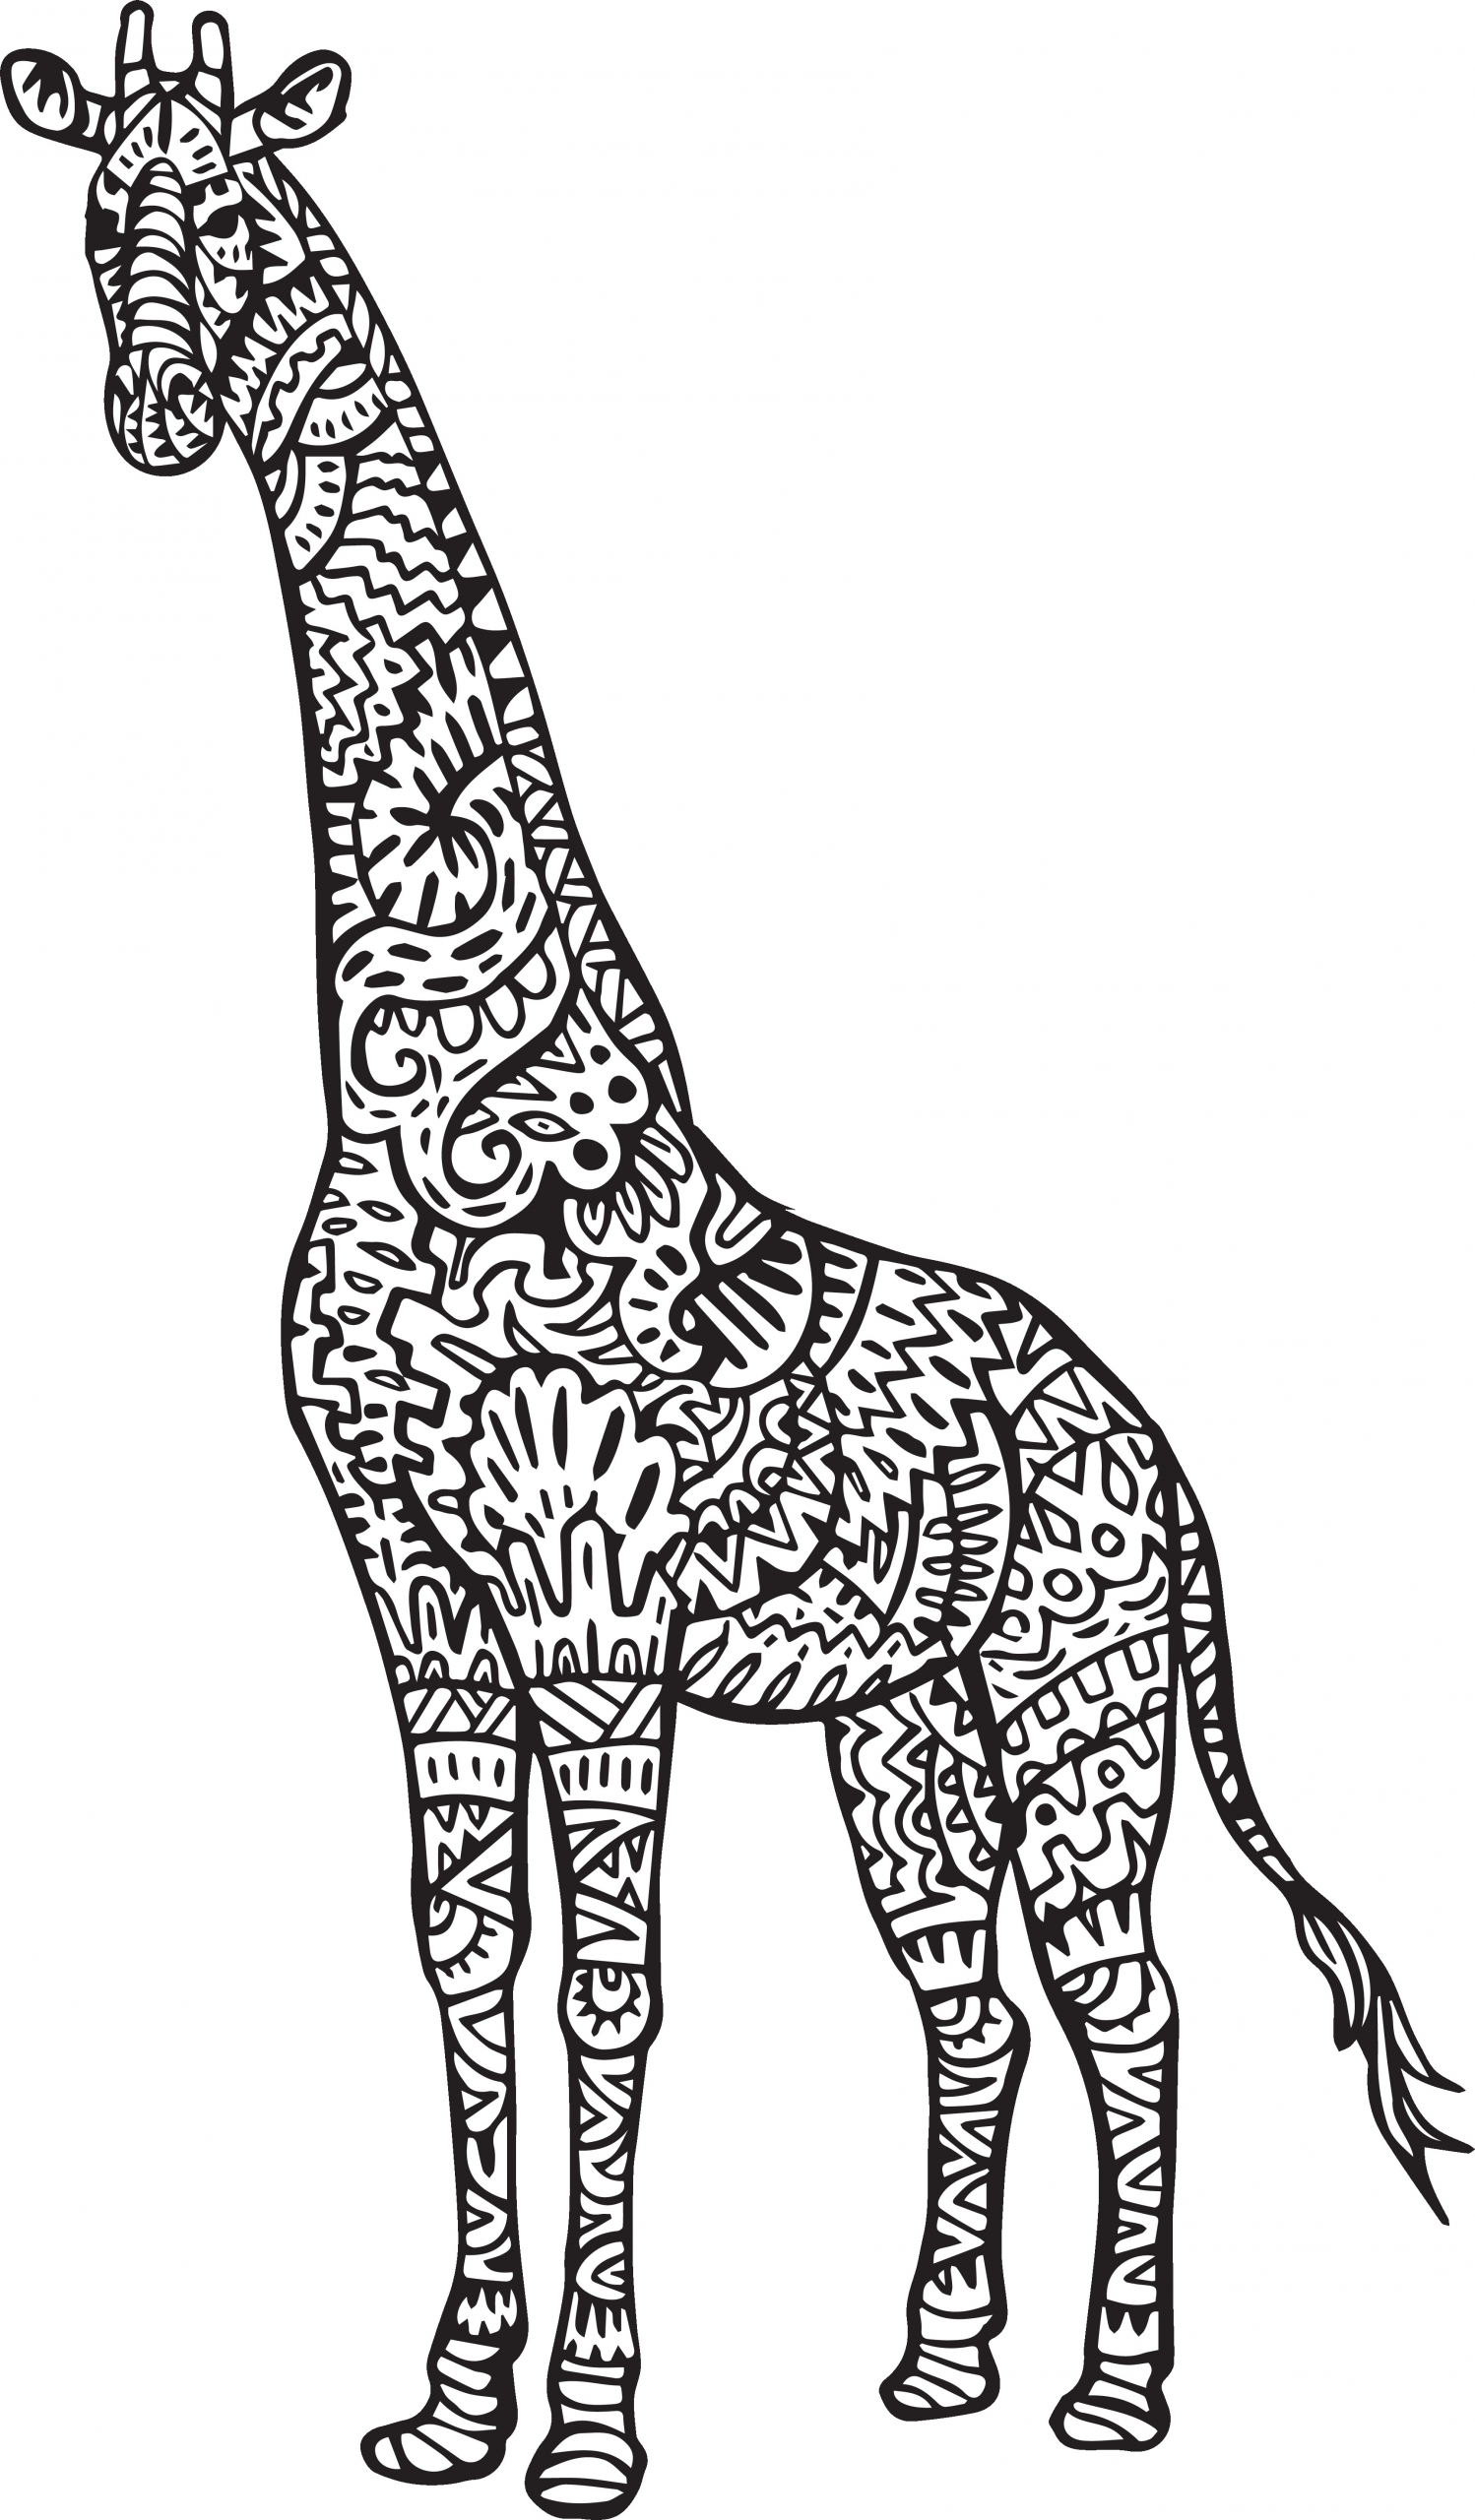 Giraffe Coloring Pages For Adults
 April s Baby has Arrived and Here is the Video Hip